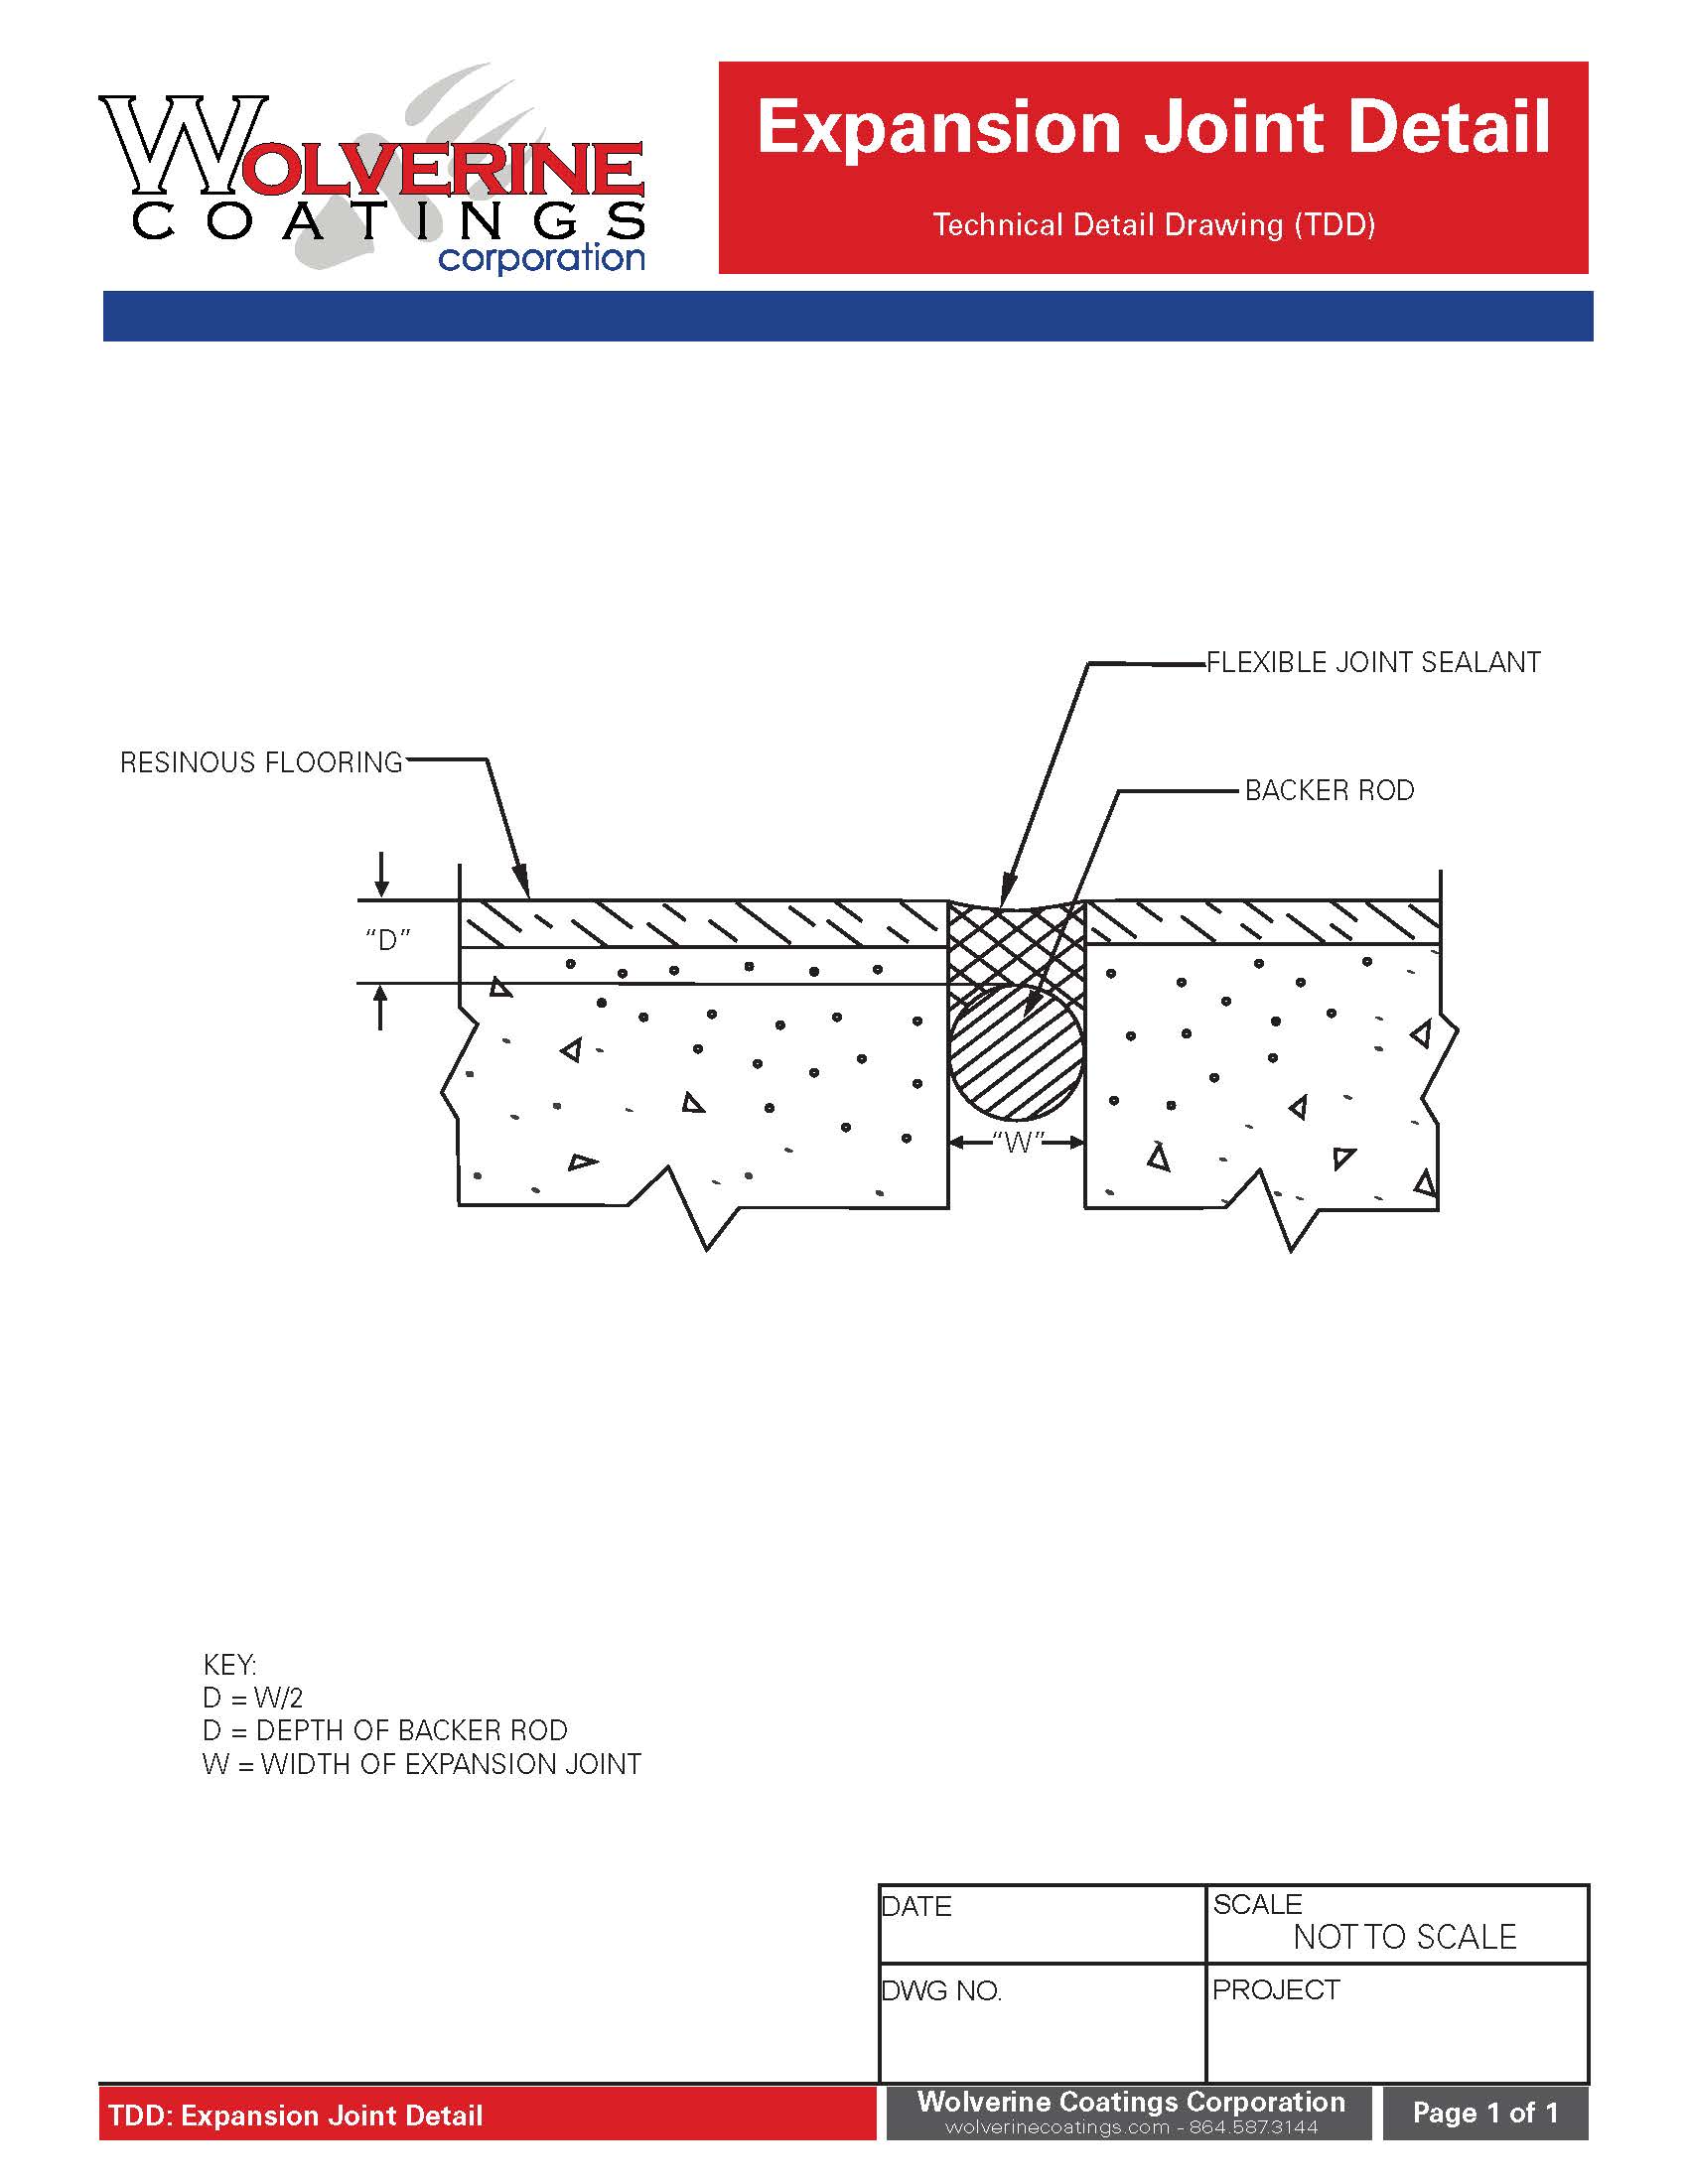 Expansion Joint Treatment Detail (Seamless)